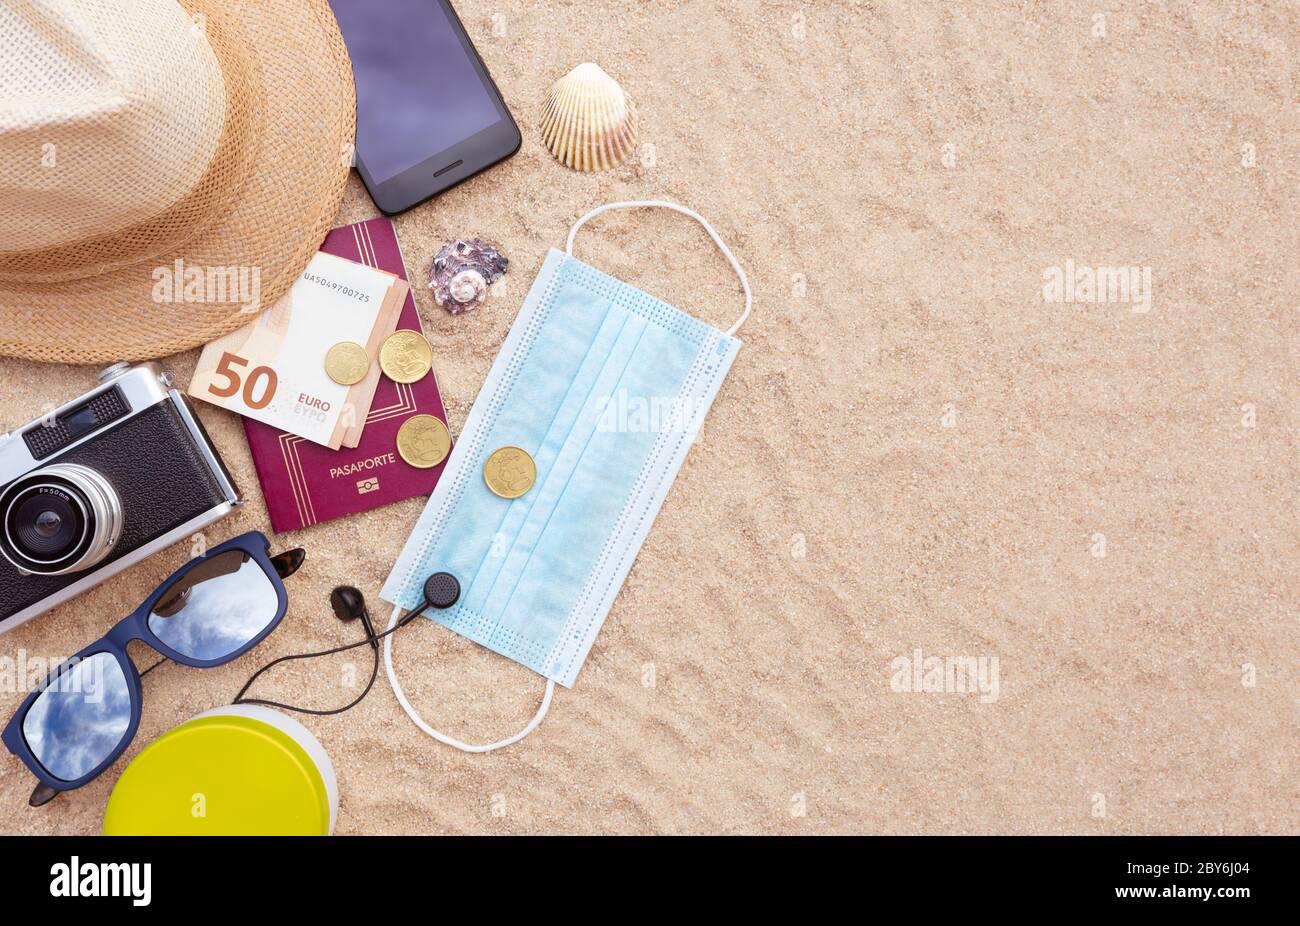 Some beach items, a protective face mask, a passport and some cash, a smartphone, hat, camera and sunglasses on the beach sand. Space for text. Concep Stock Photo